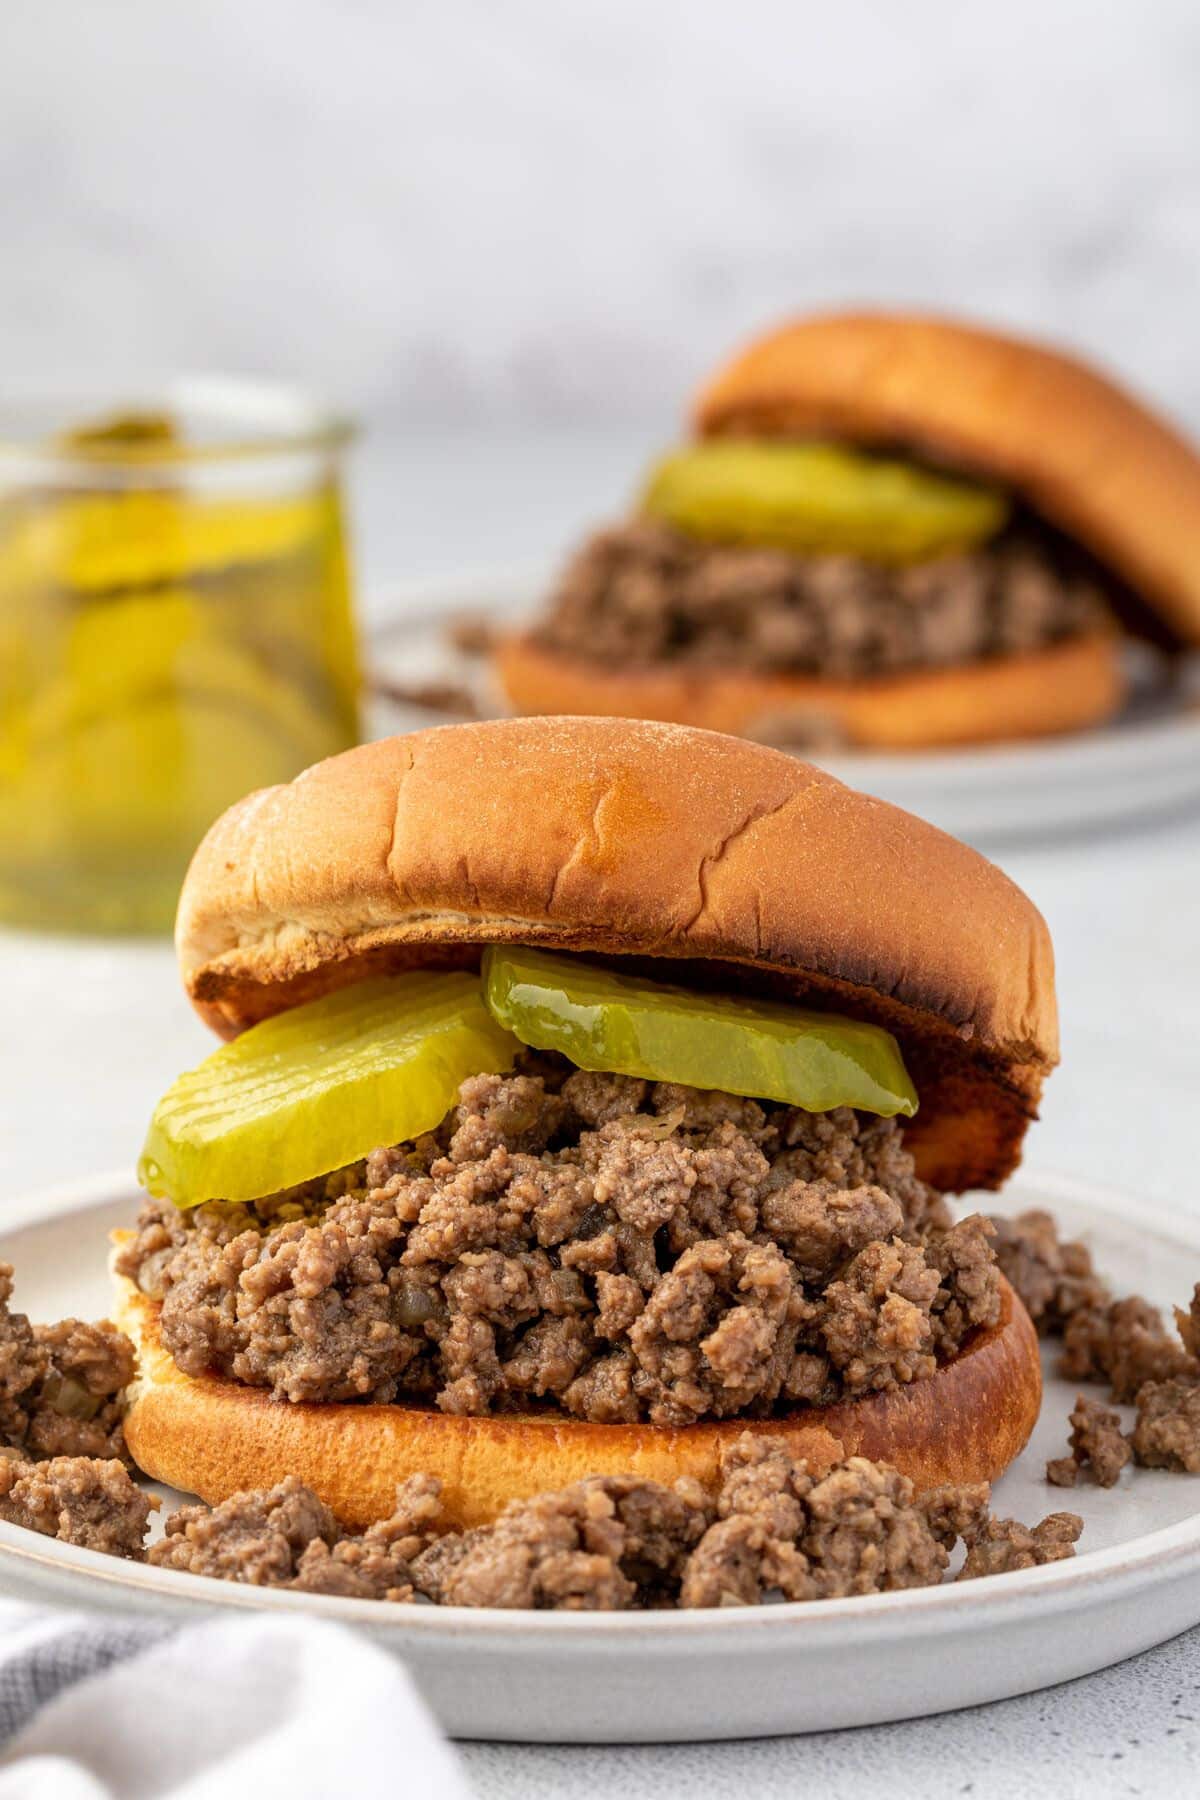 A hamburger bun filled with meat crumbles that are spilling out on a small plate, 2 pickle rings, topped with a bun.